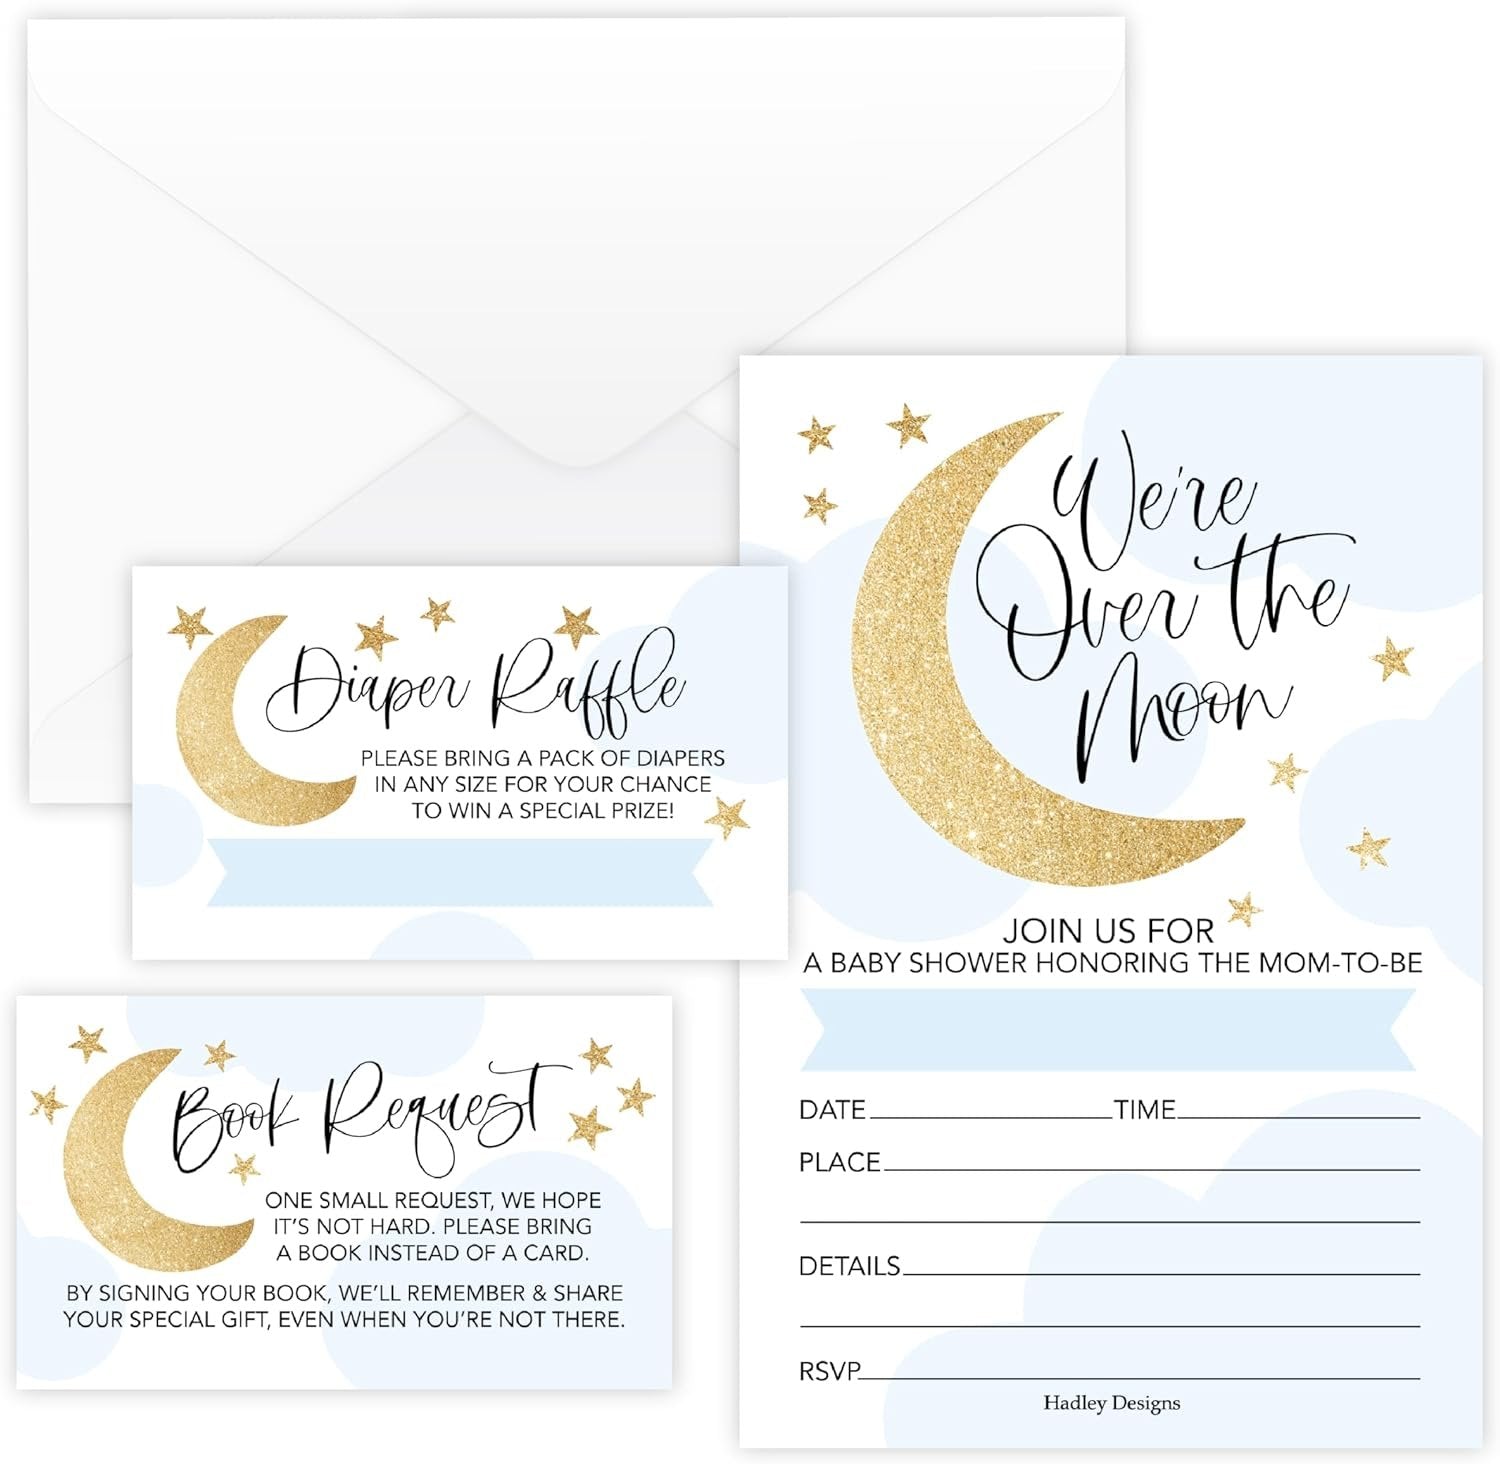 Baby Shower Invitations Shop by Theme | Twinkle Twinkle